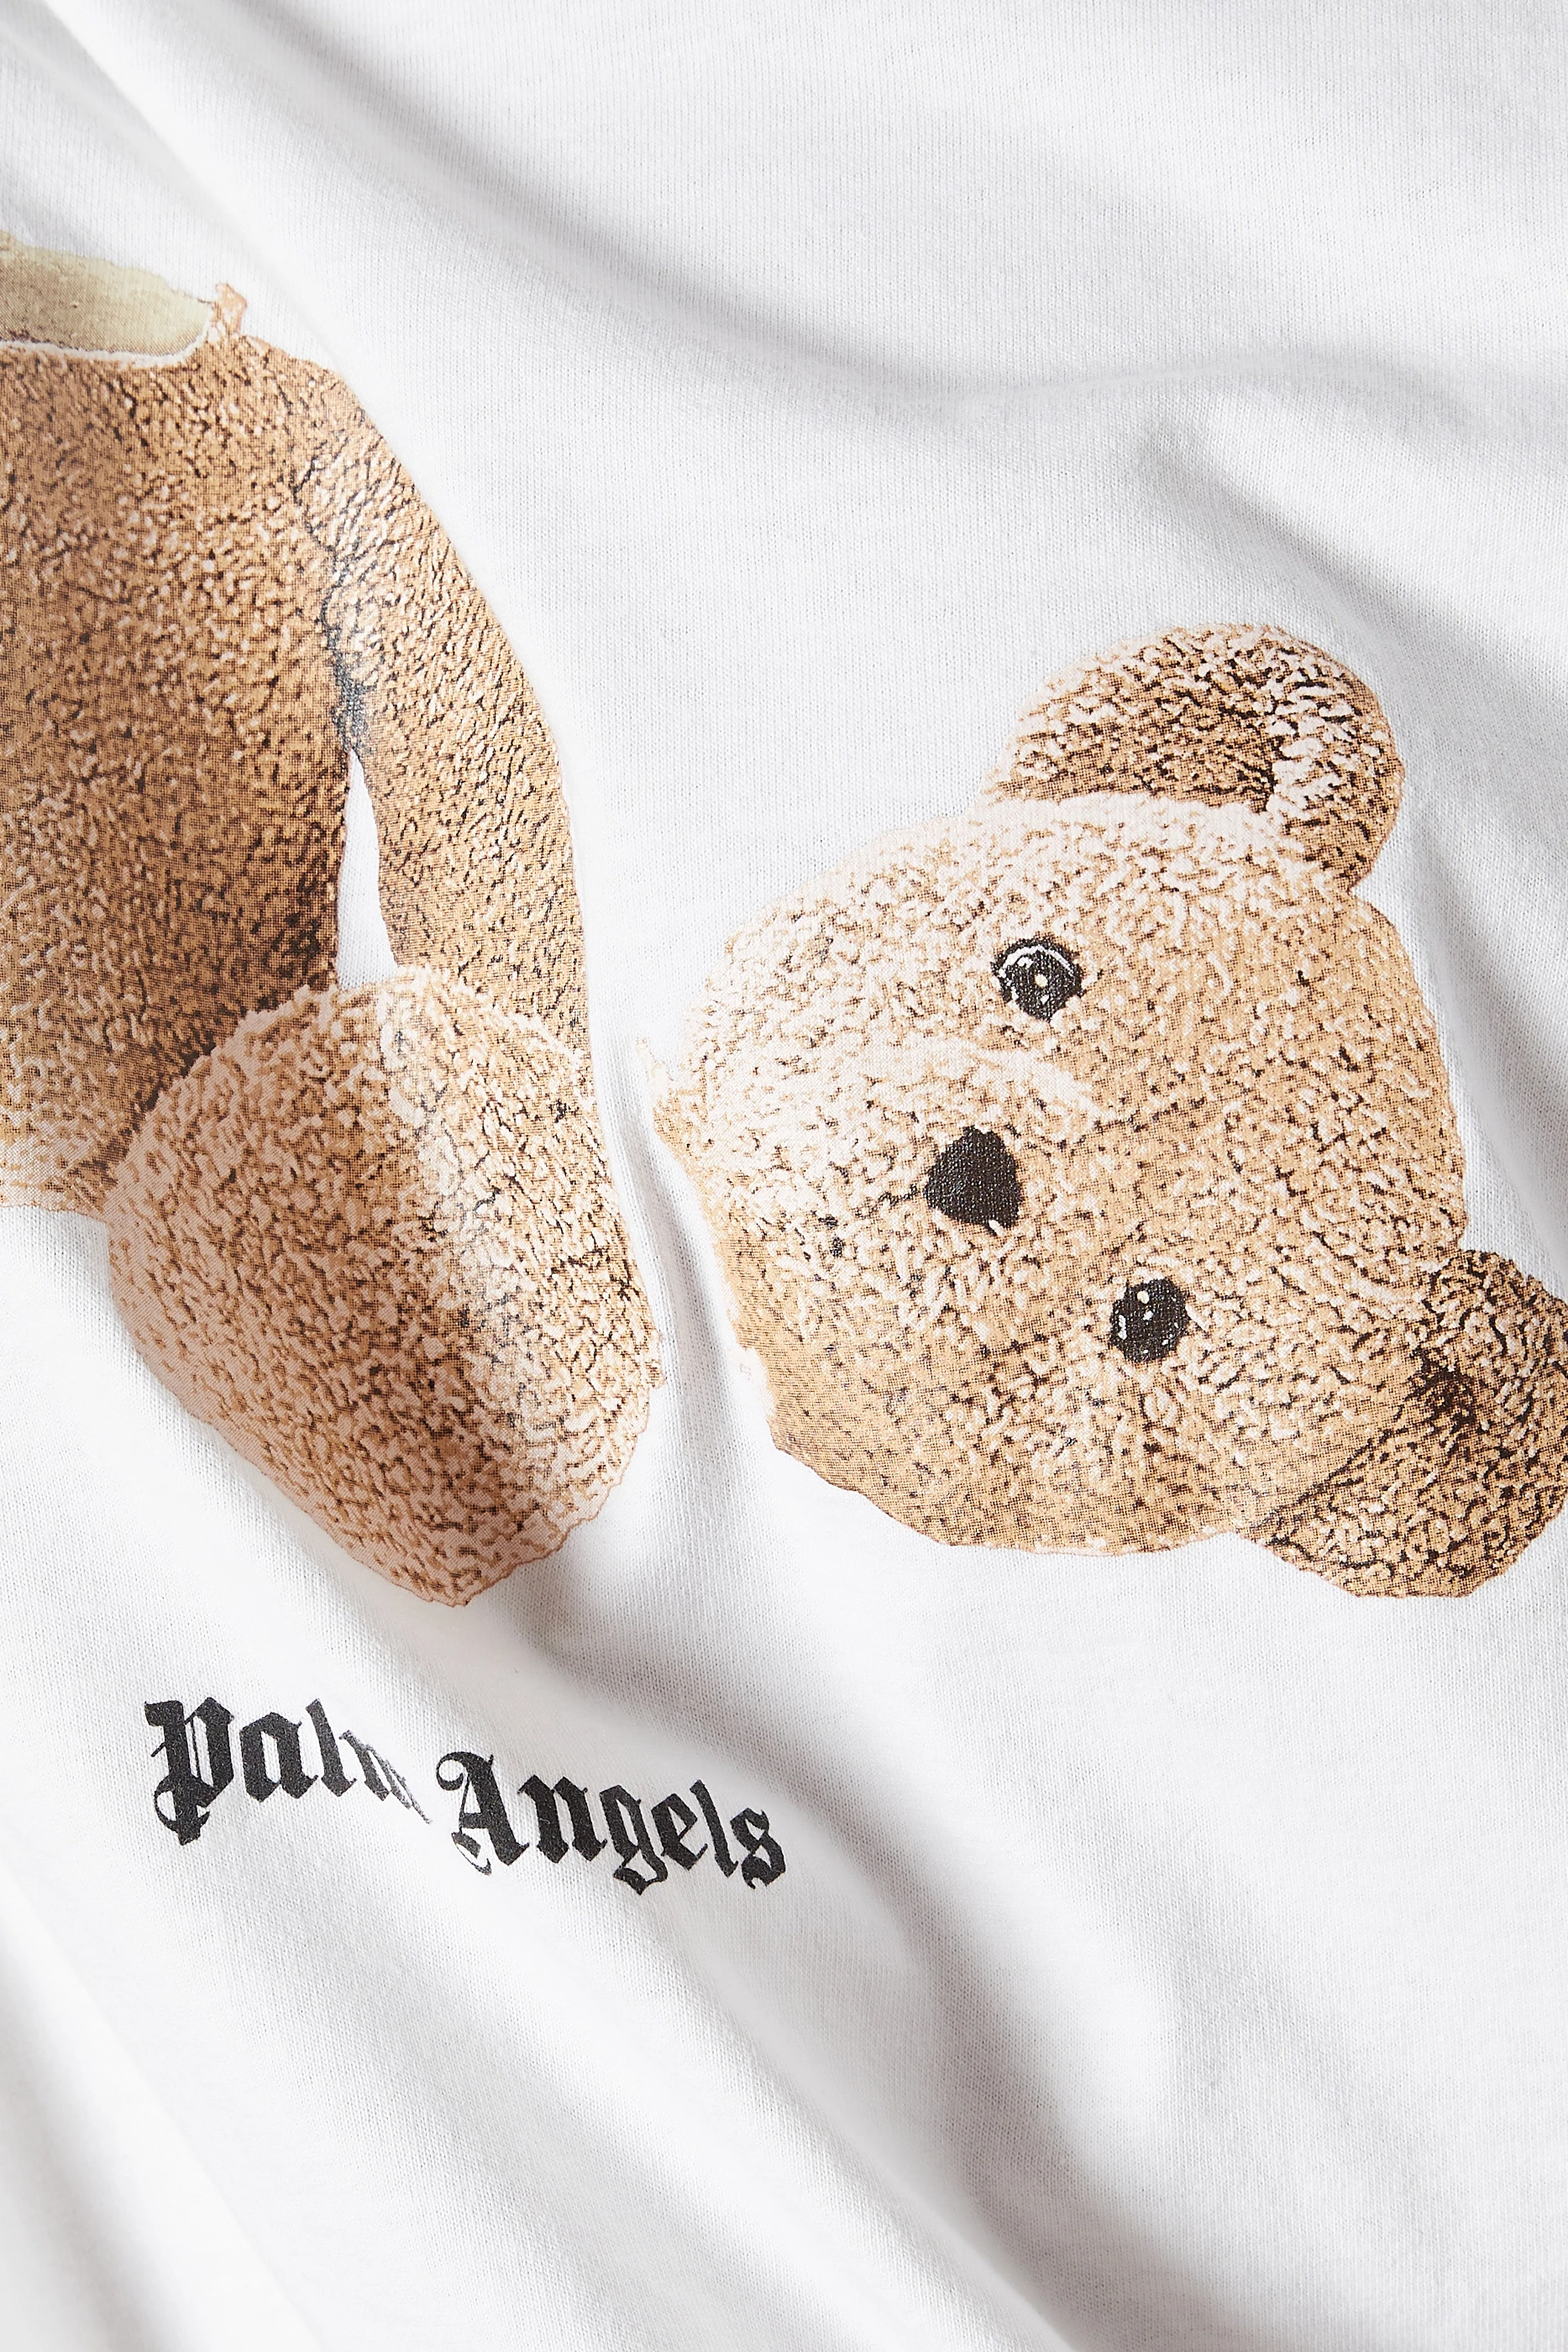 BEAR T-SHIRT in white - Palm Angels® Official